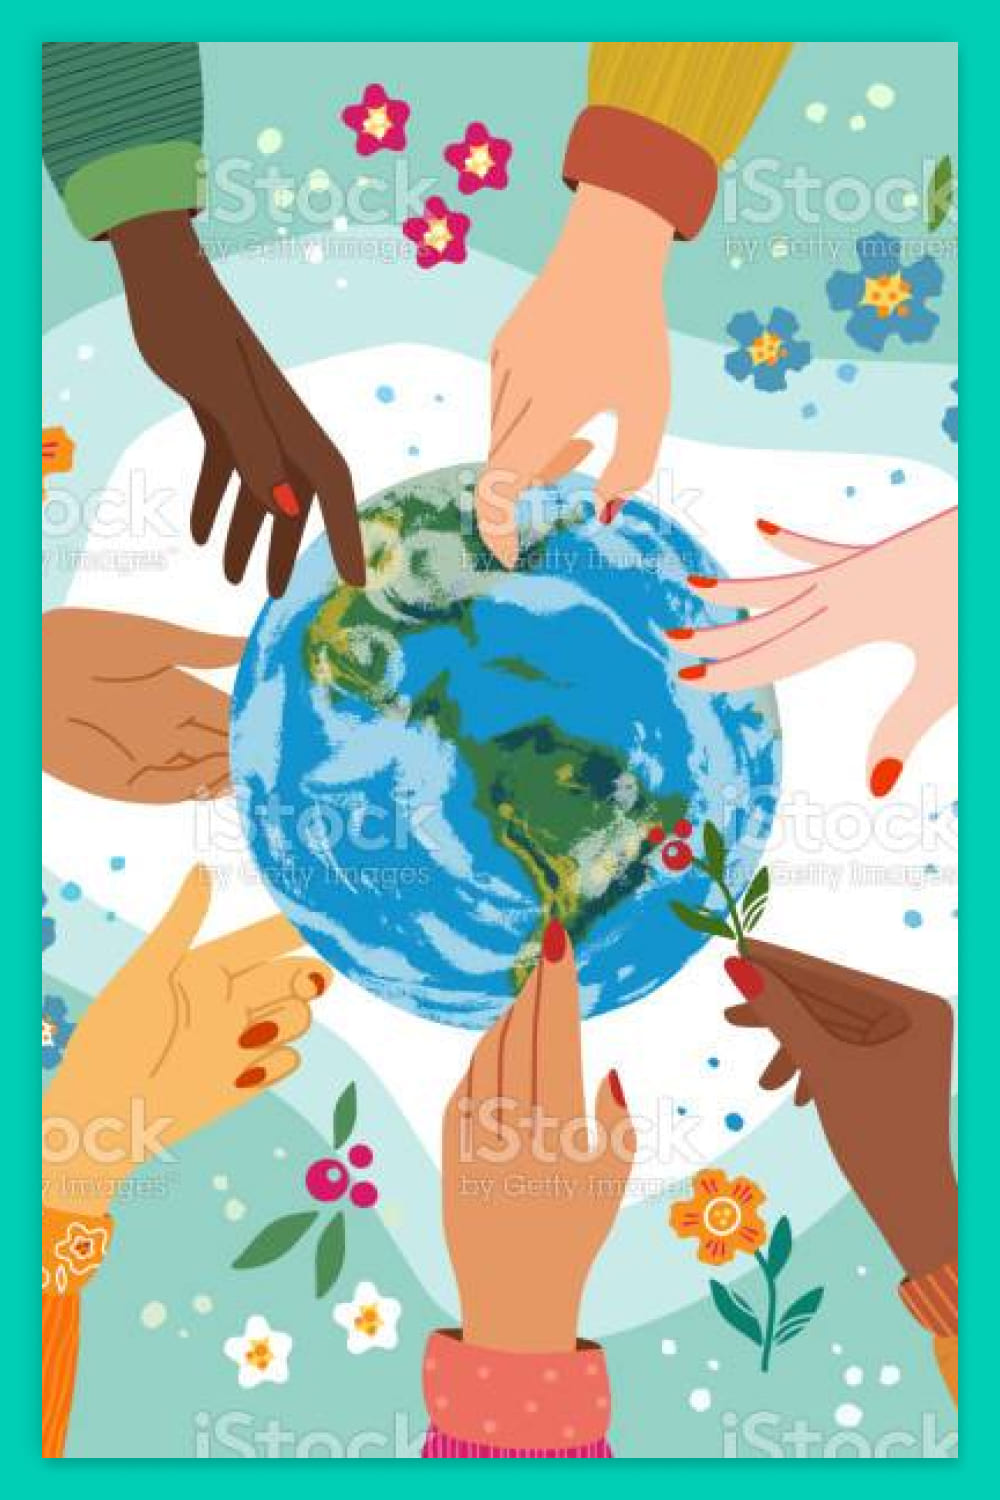 Hands of people of different nationalities reaching out to the Earth.